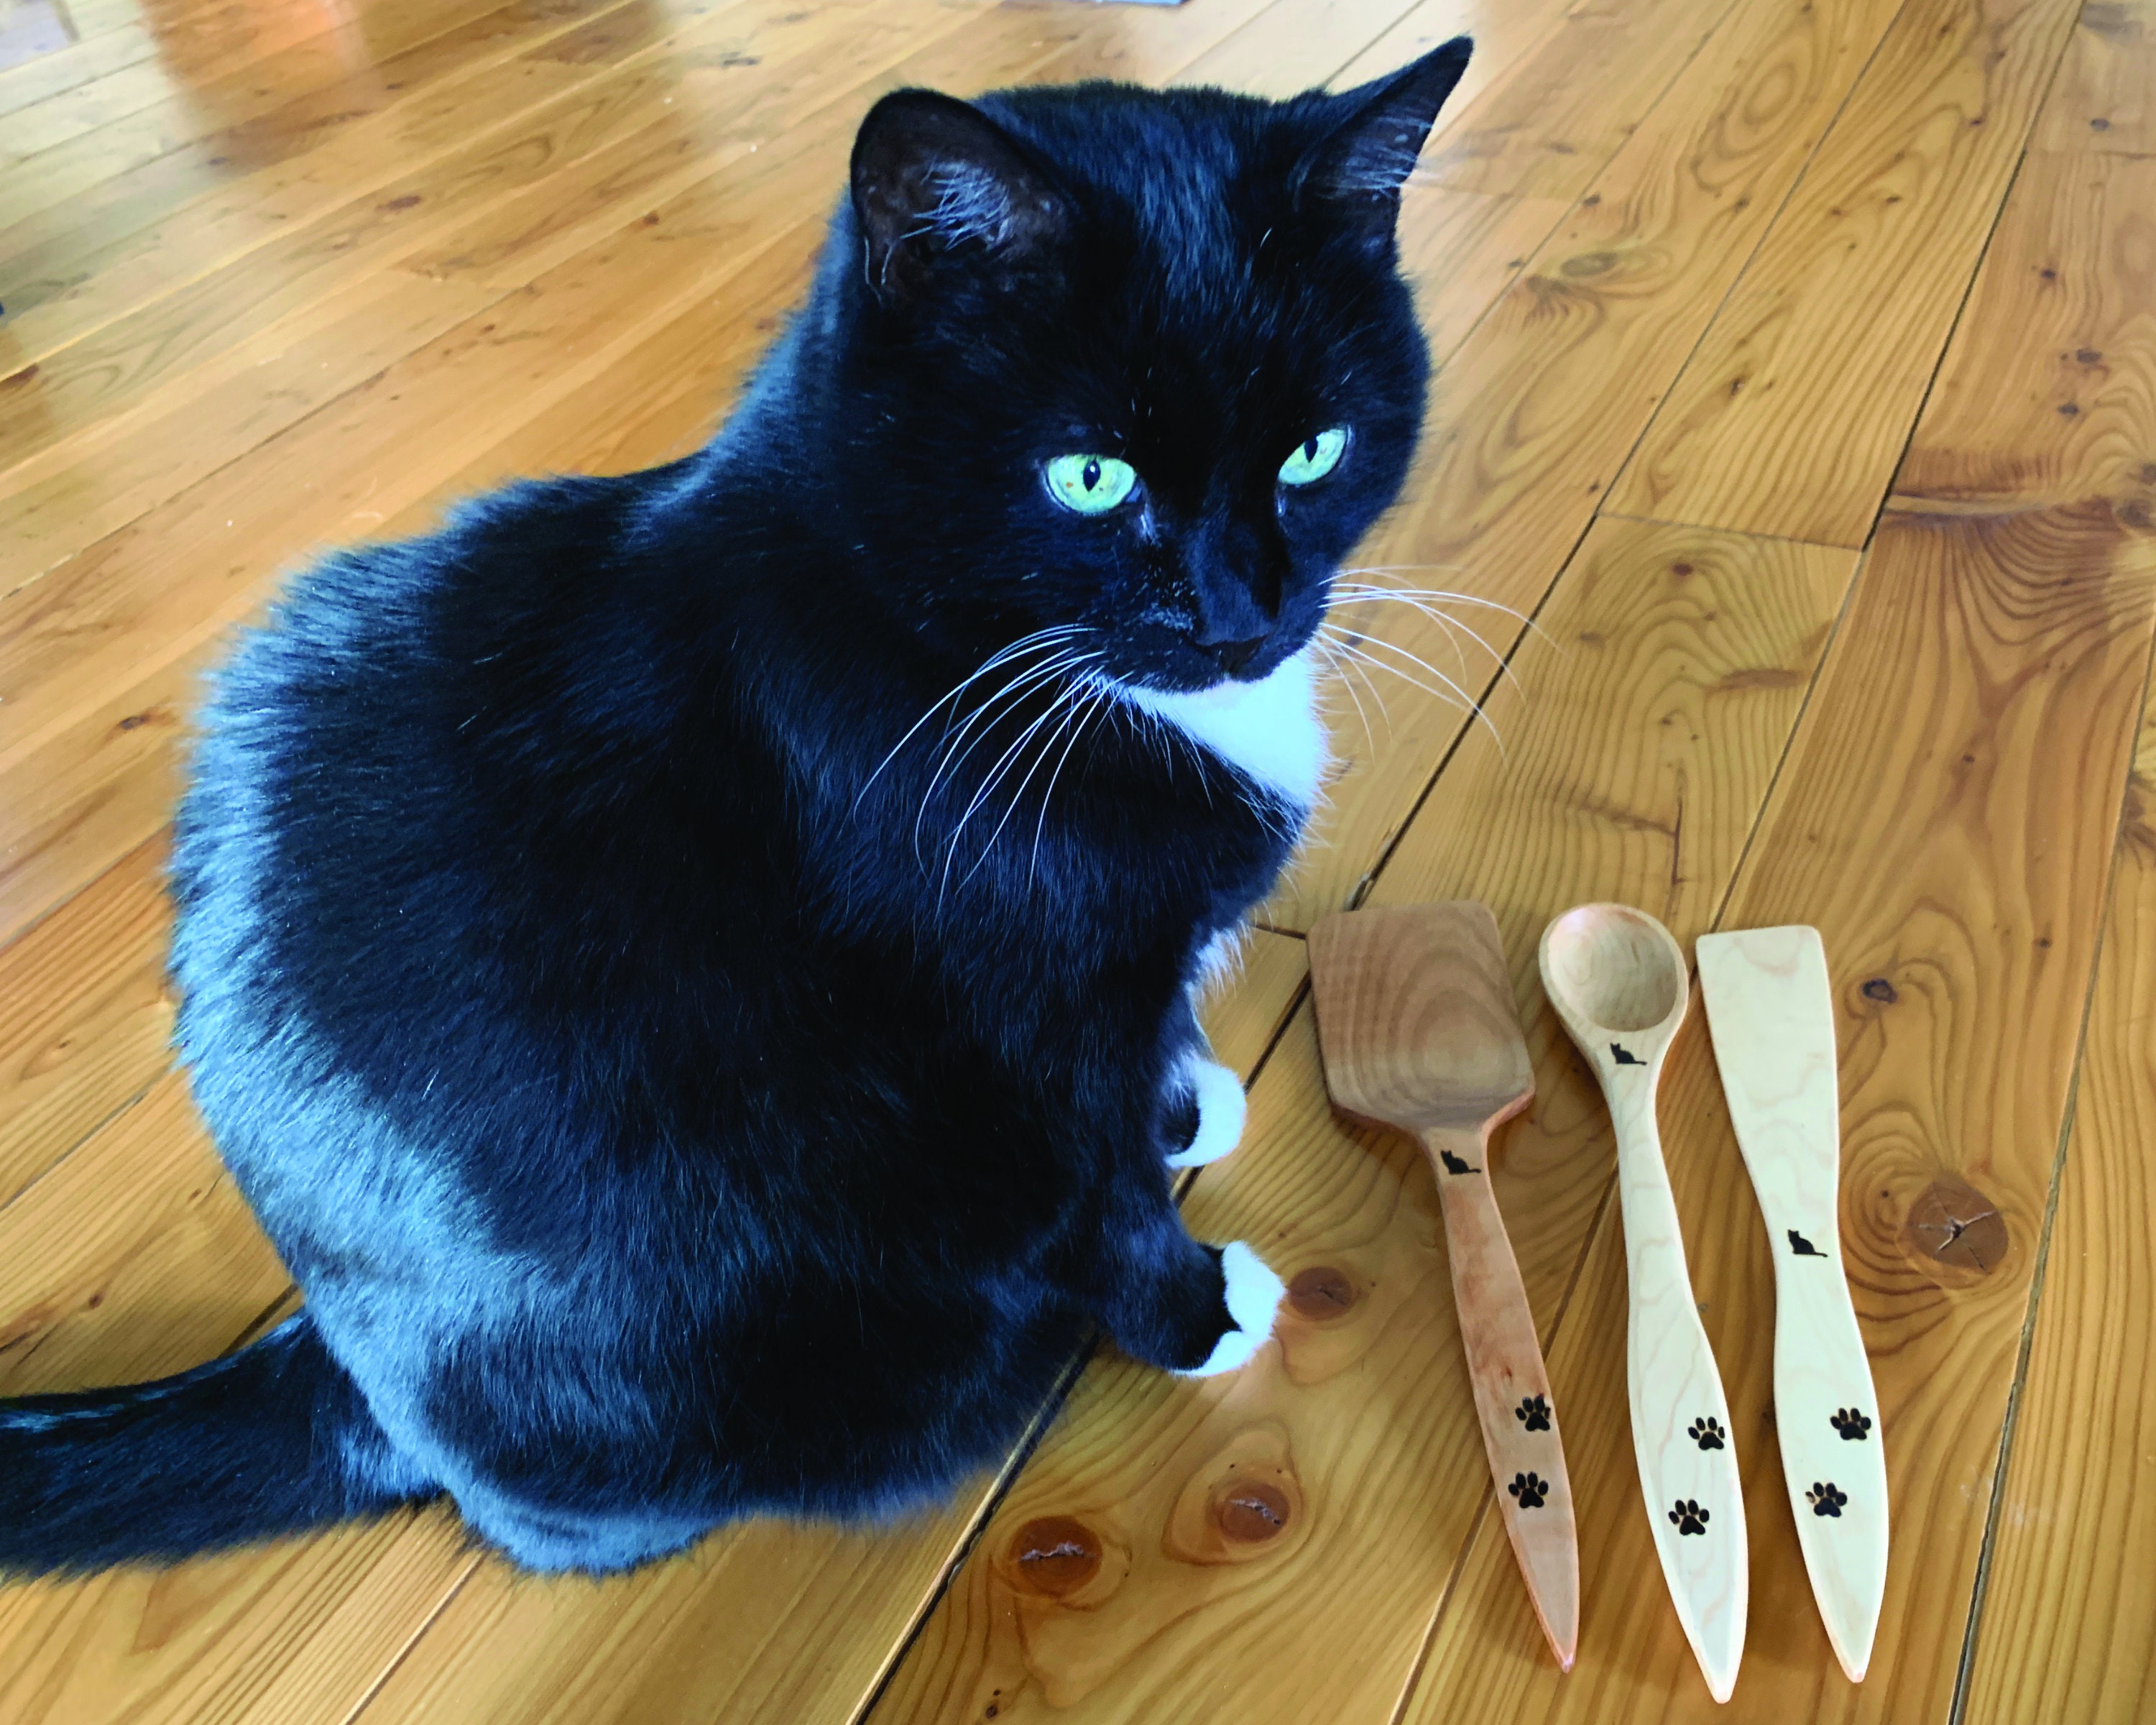 Votum Ceramic Measuring Spoons Set - Adorable Cat Shaped Stackable Spoons with Hand Painted Details - 4 Piece Set: 1 Tbsp, 1 tsp, 1/2 TSP & 1/4 TSP